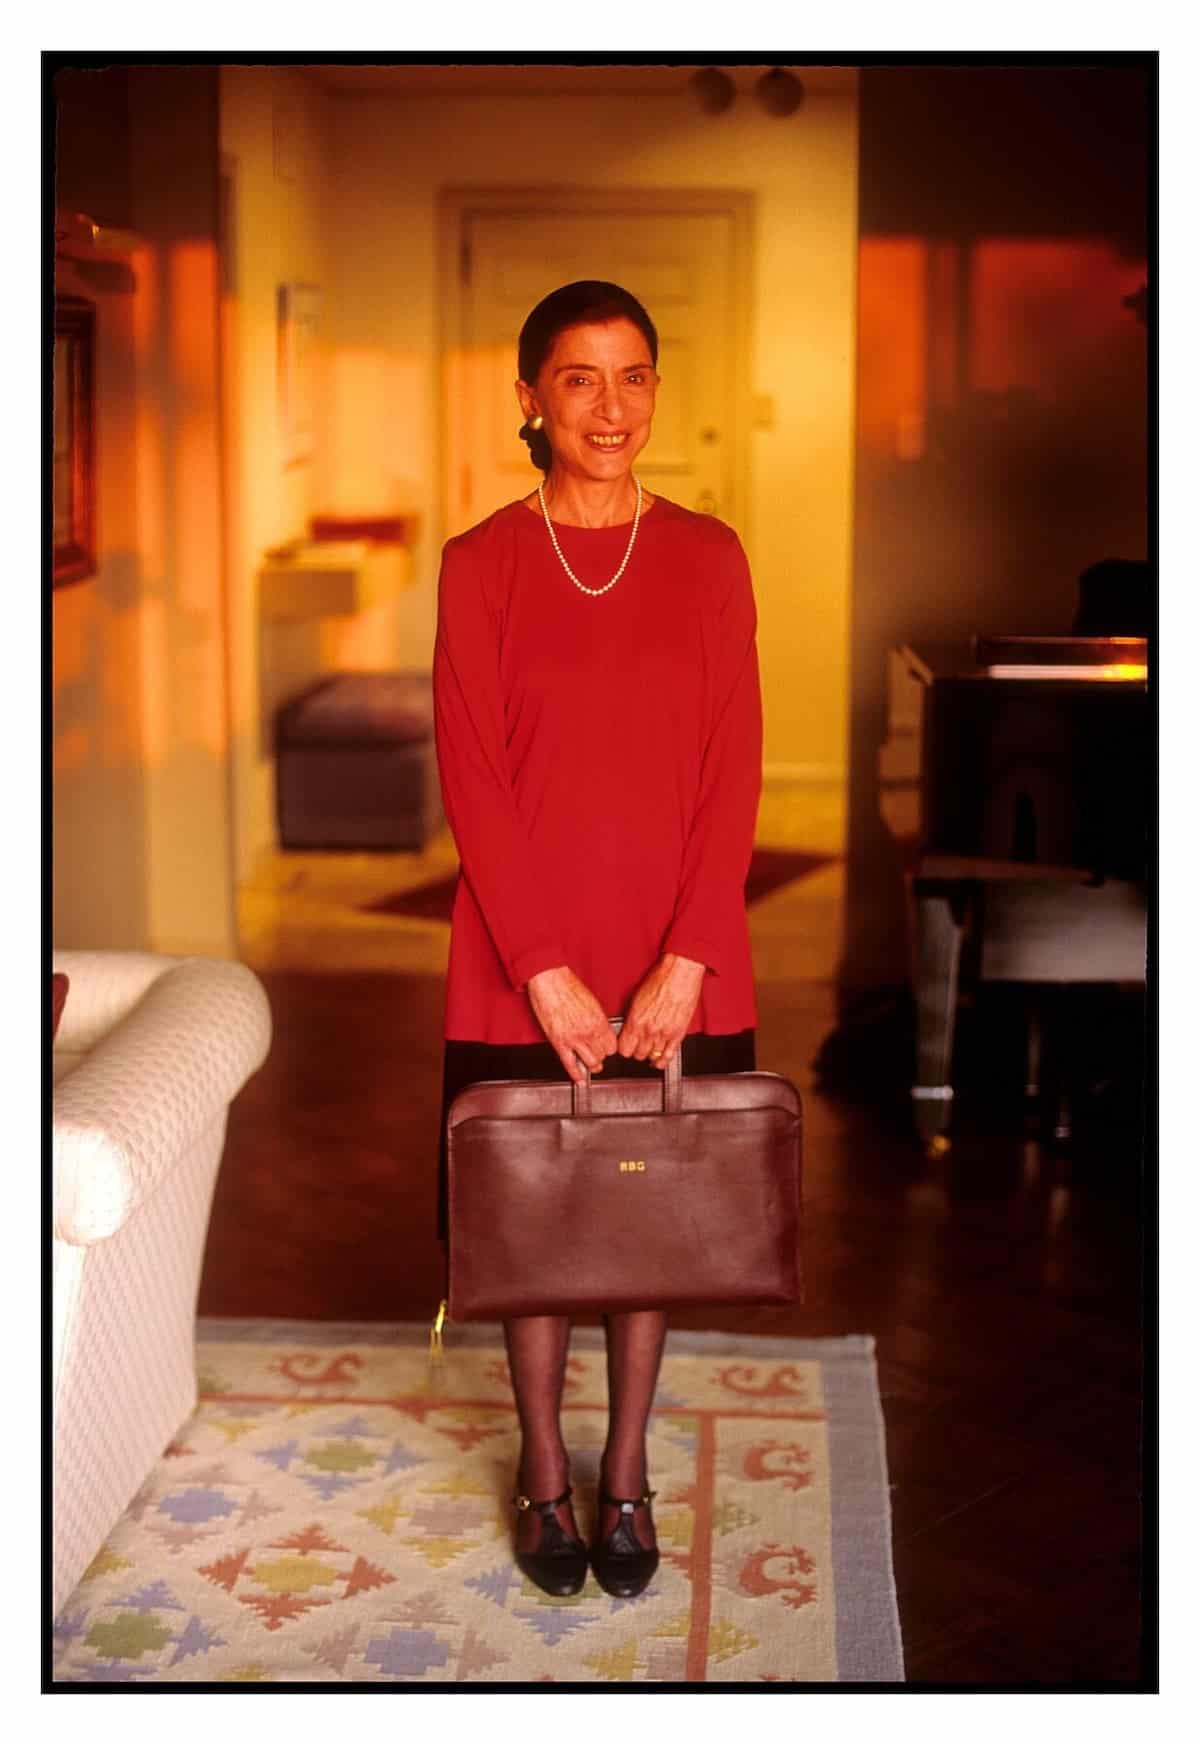 Supreme Court Justice Ruth Bader Ginsburg, at home, shortly after her nomination to the court.